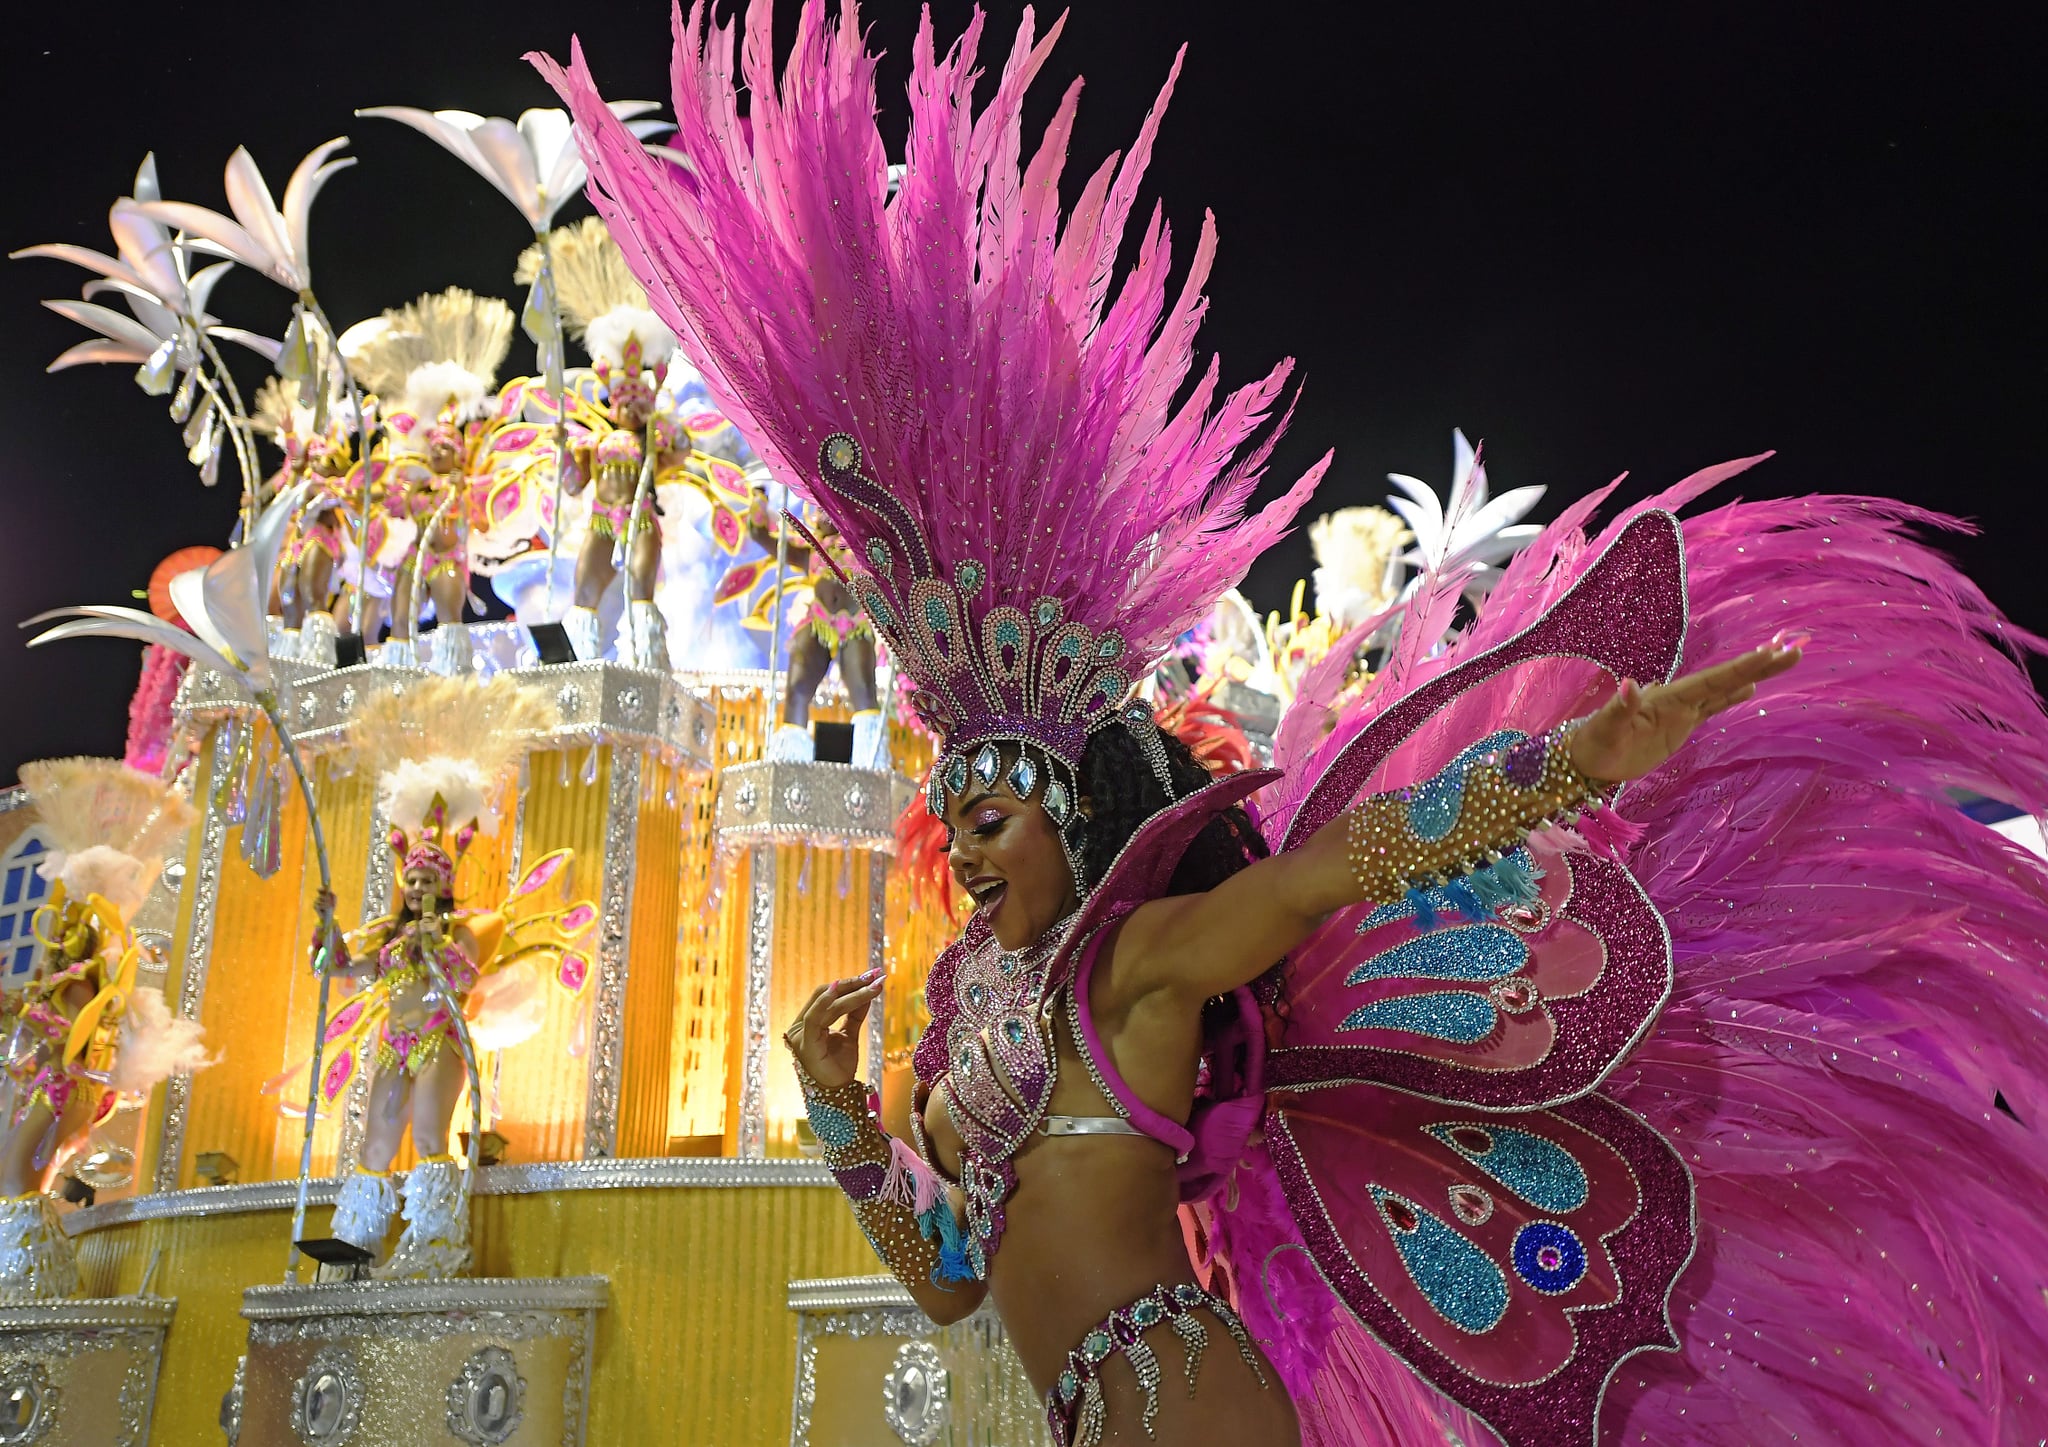 TOPSHOT - Members of the Paraiso do Tuiuti samba school perform during the second night of Rio's Carnival parade at the Sambadrome in Rio de Janeiro, Brazil early on March 4, 2019. -  (Photo by CARL DE SOUZA / AFP)        (Photo credit should read CARL DE SOUZA/AFP via Getty Images)